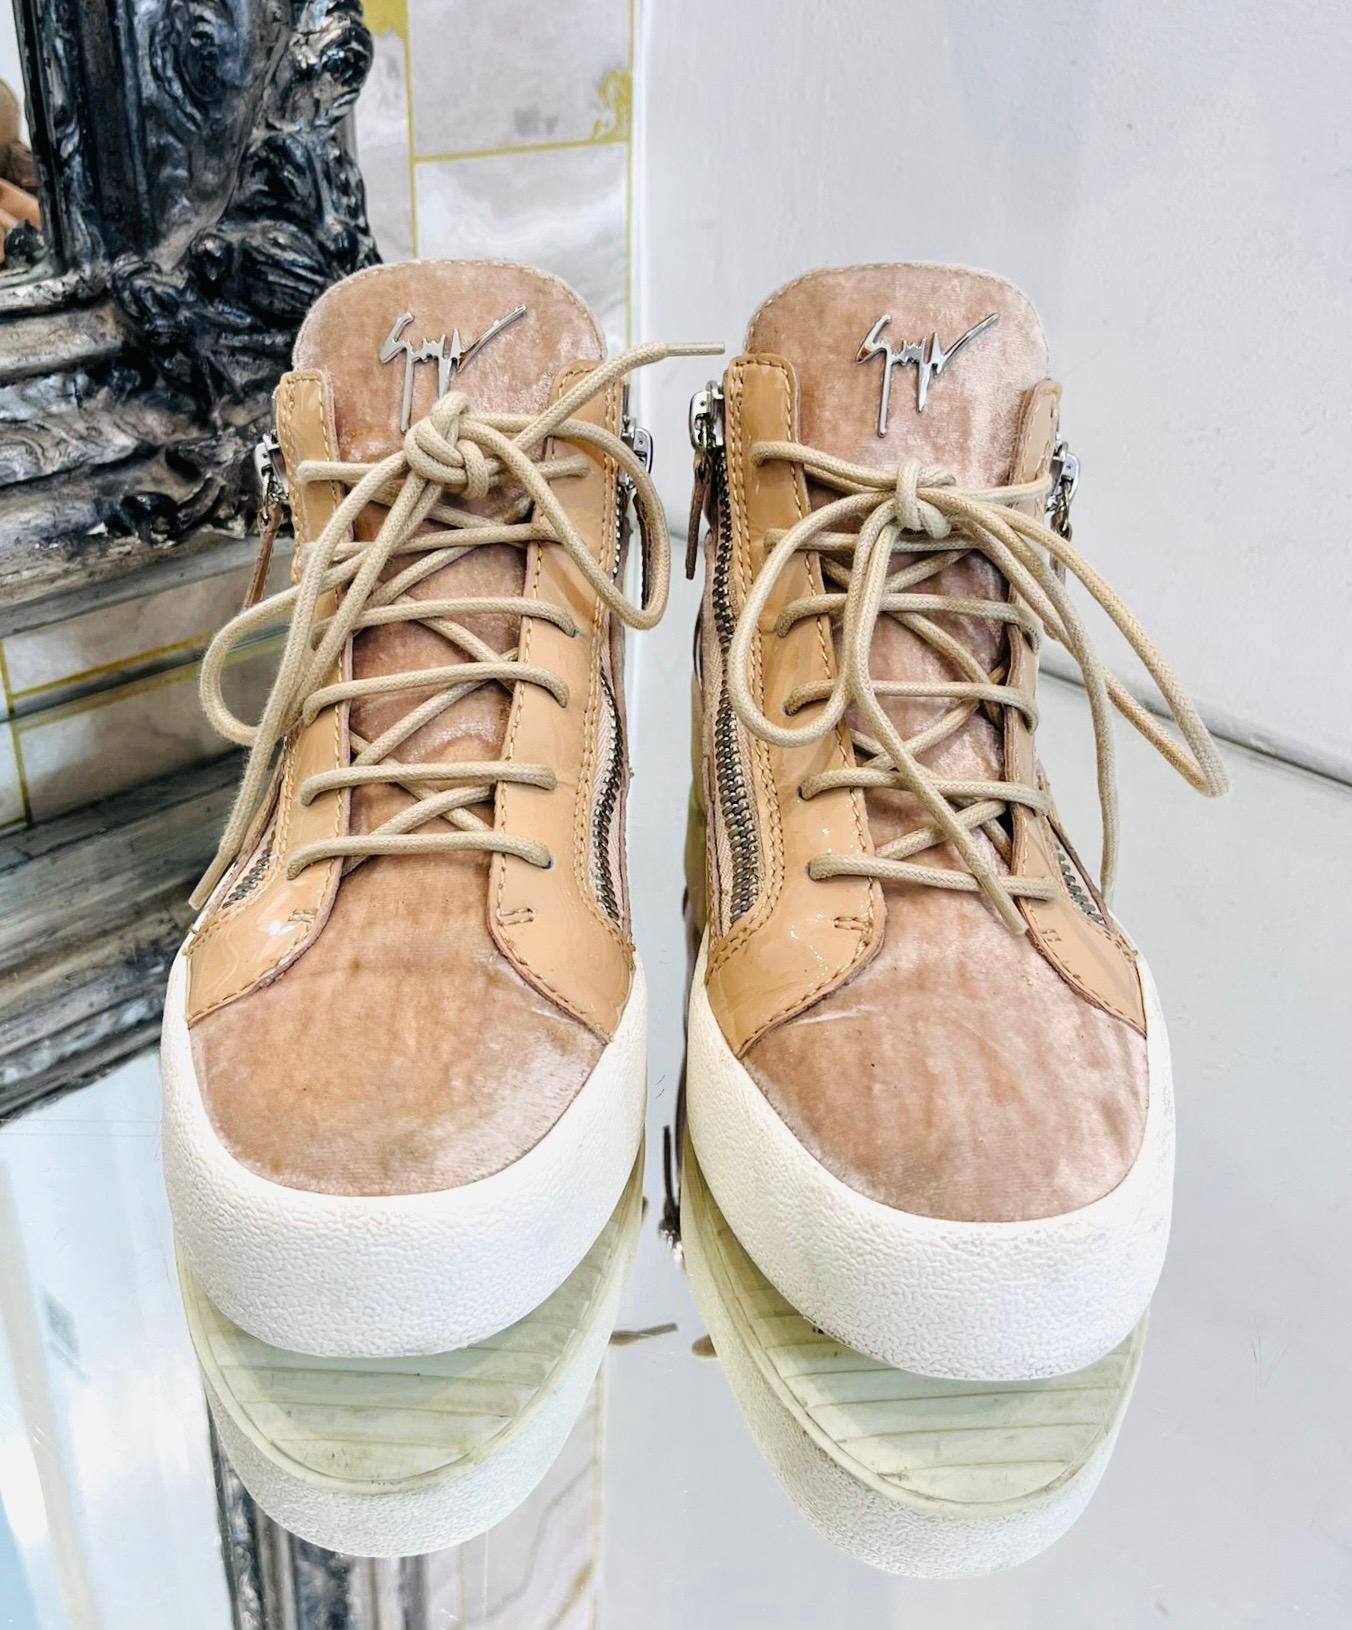 Giuseppe Zanotti Patent Leather & Velvet Sneakers

Beige velvet, lace-up sneakers designed with patent leather inserts.

Featuring silver 'Giuseppe Zanotti' logo to the tongue and zip detail on either side.

Size – 38

Condition – Very Good (Minor